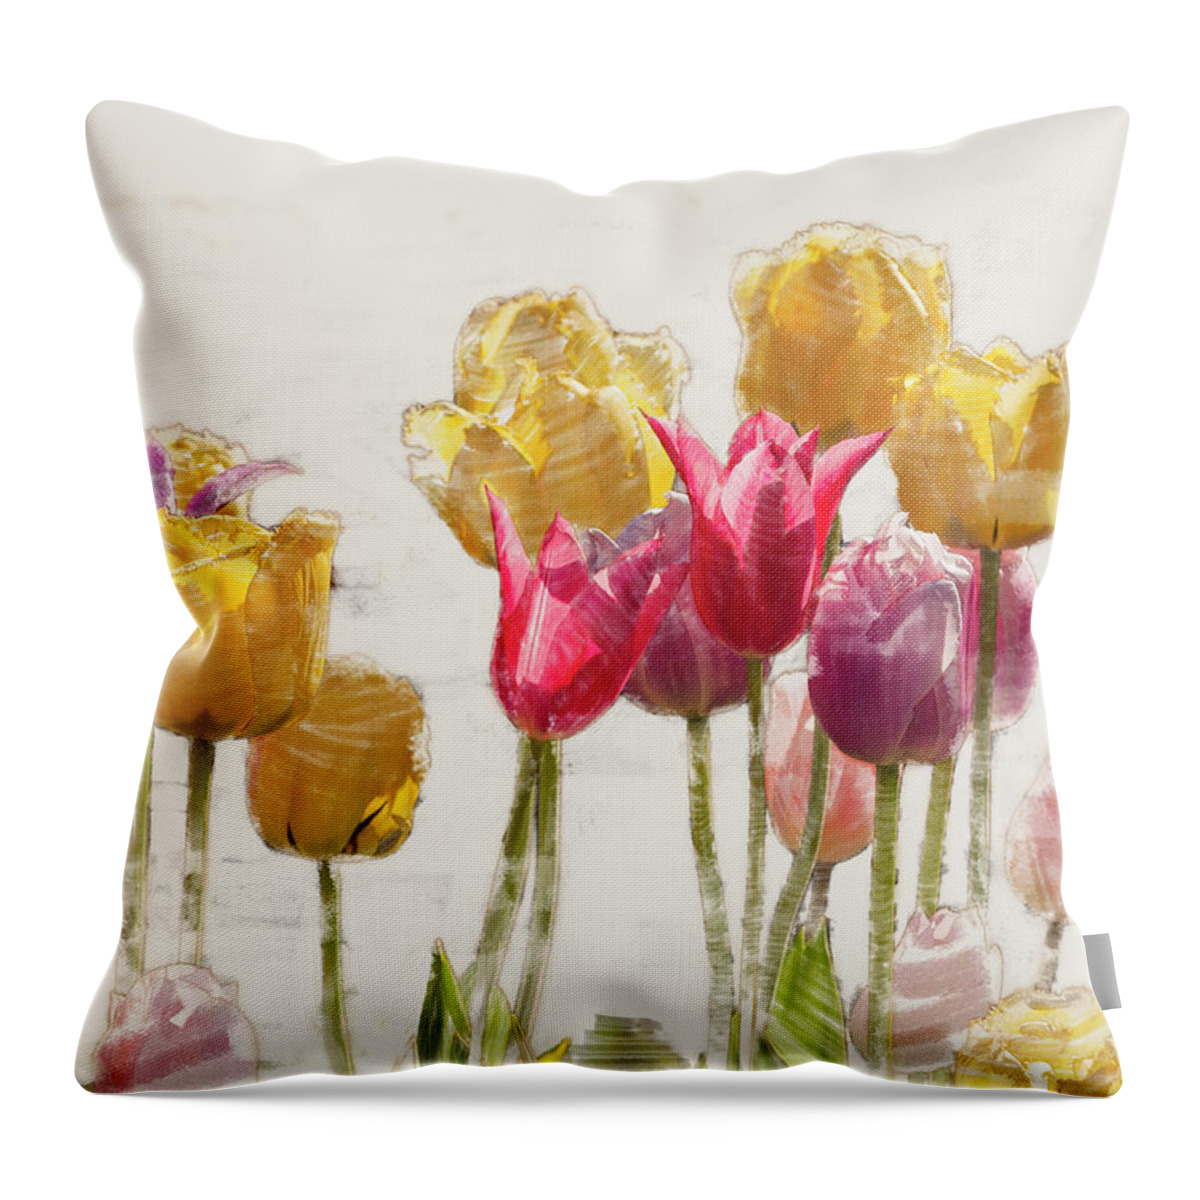 5dii Throw Pillow featuring the digital art Tulipe by Mark Mille